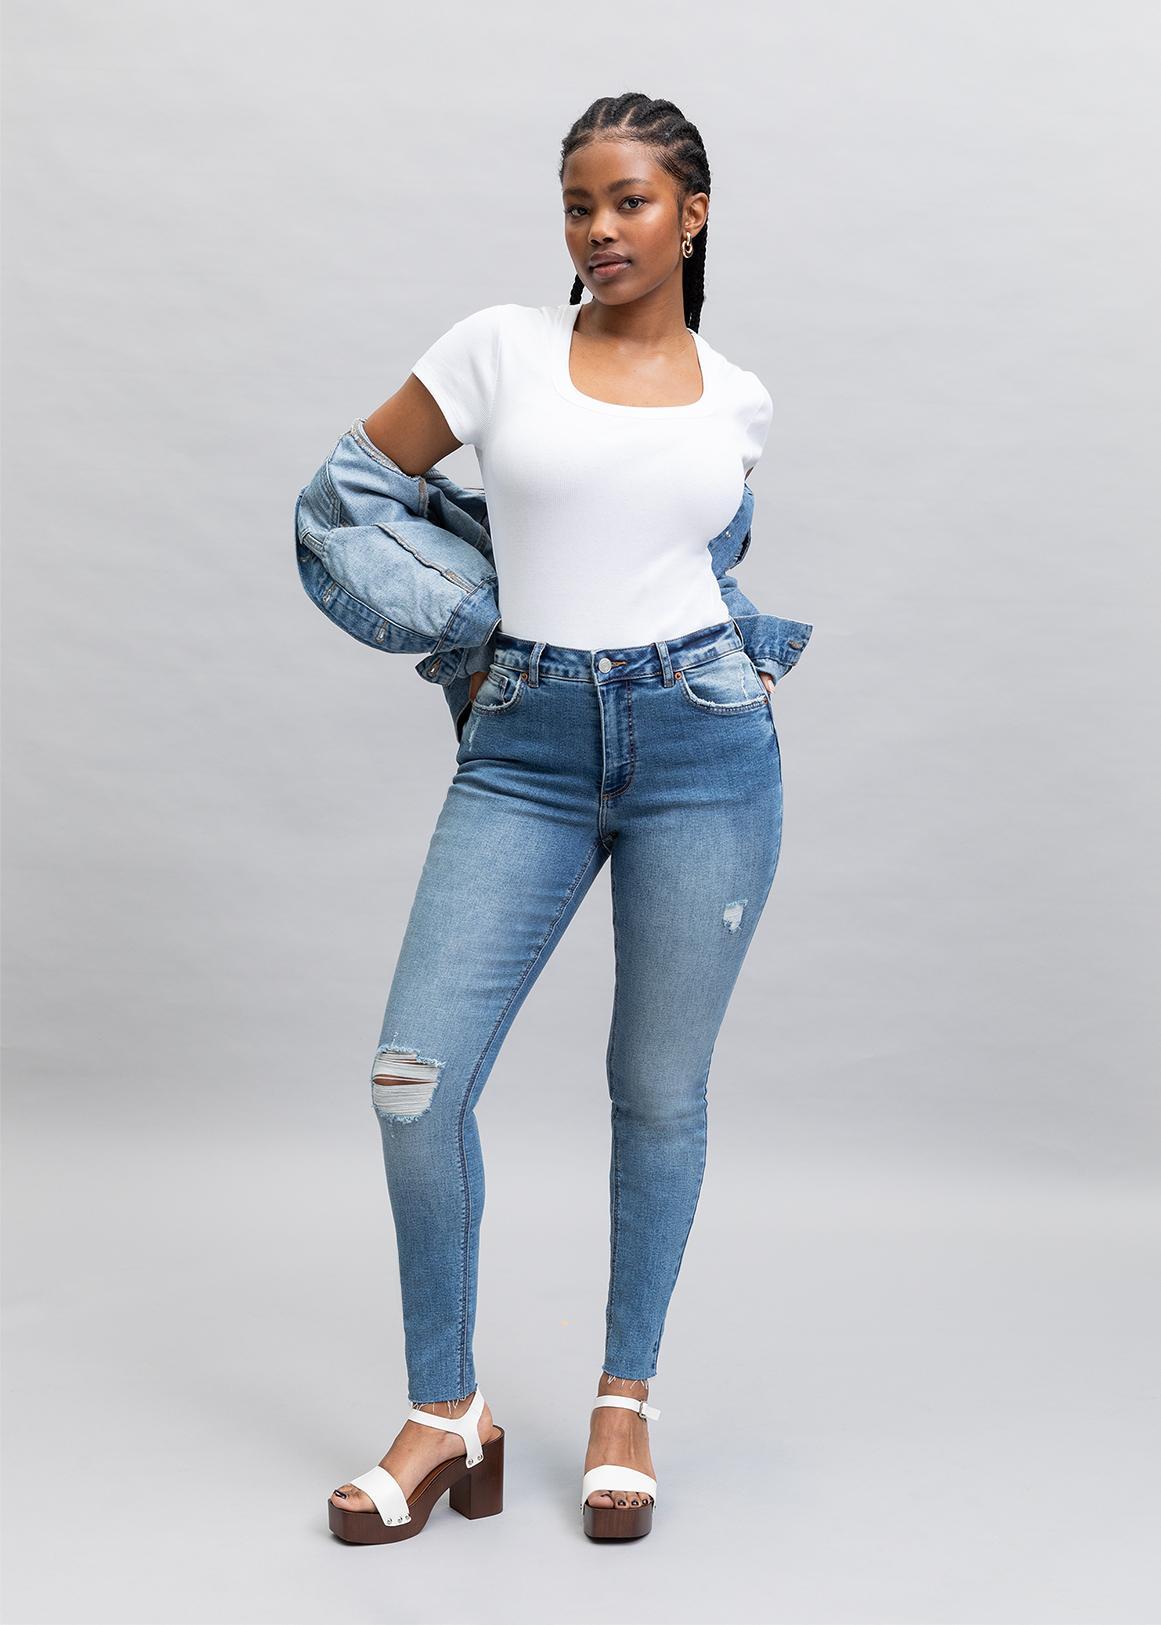 Plus Size WAX High Waisted Distressed Jeans - Light Wash